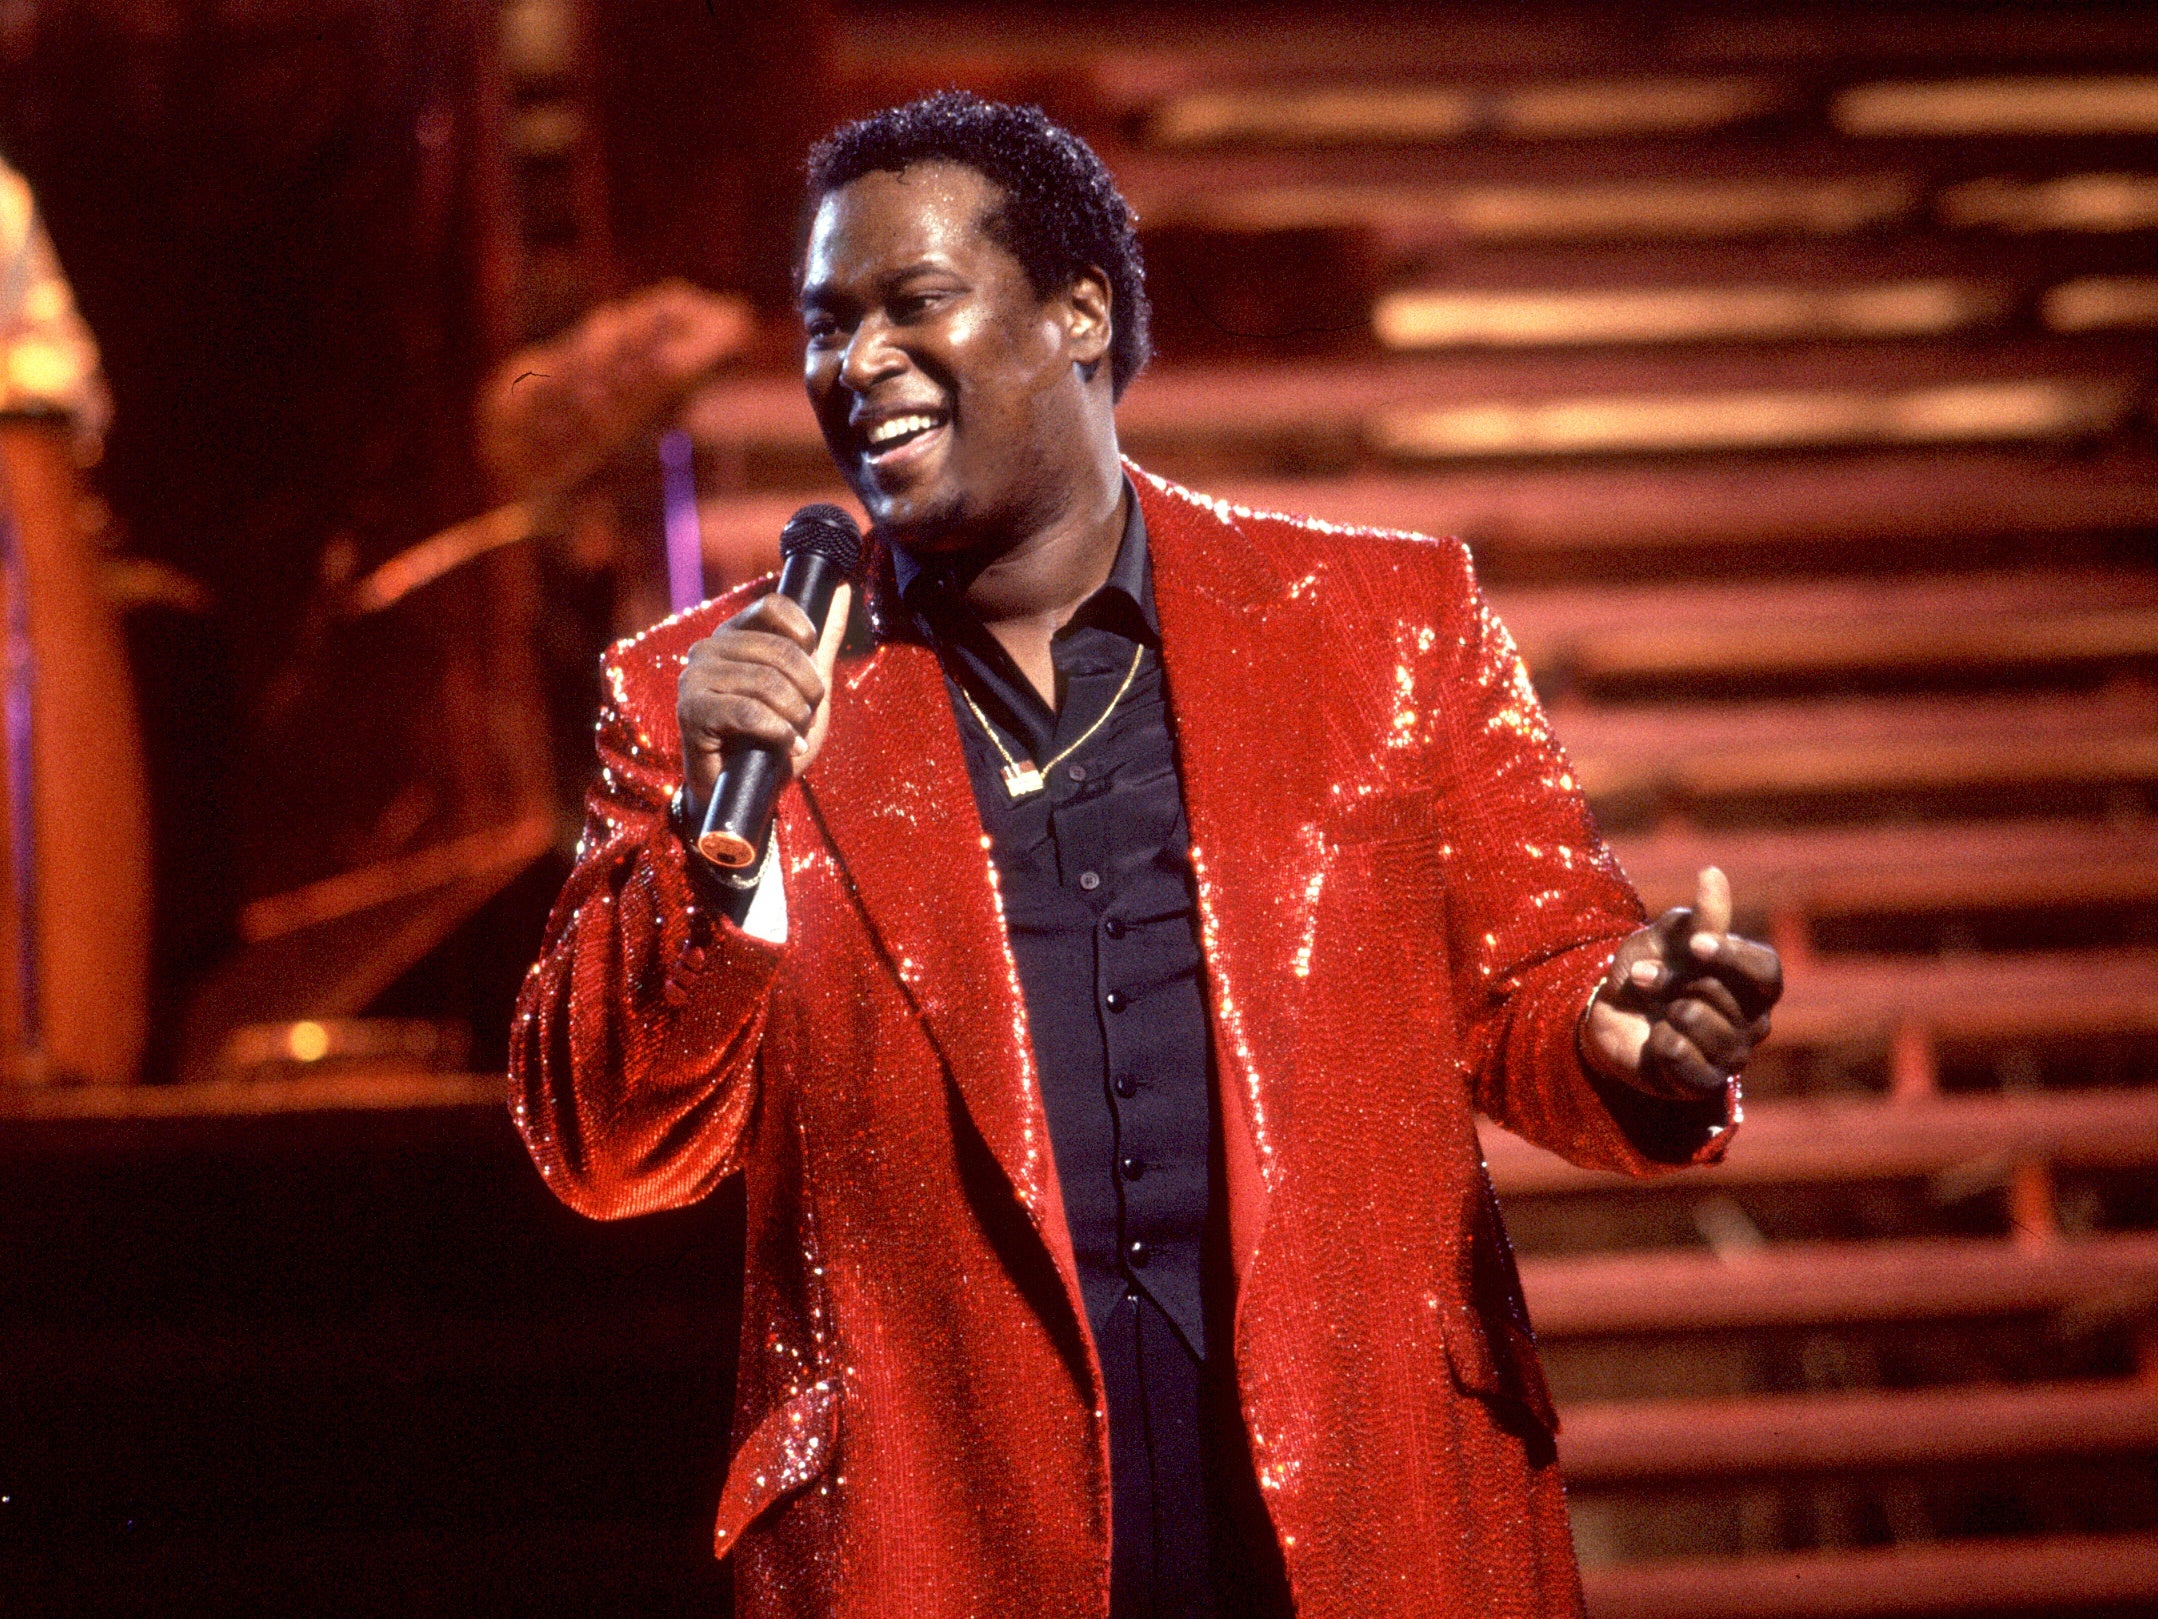 Luther Vandross ‘Never Too Much’ Headed To Sundance